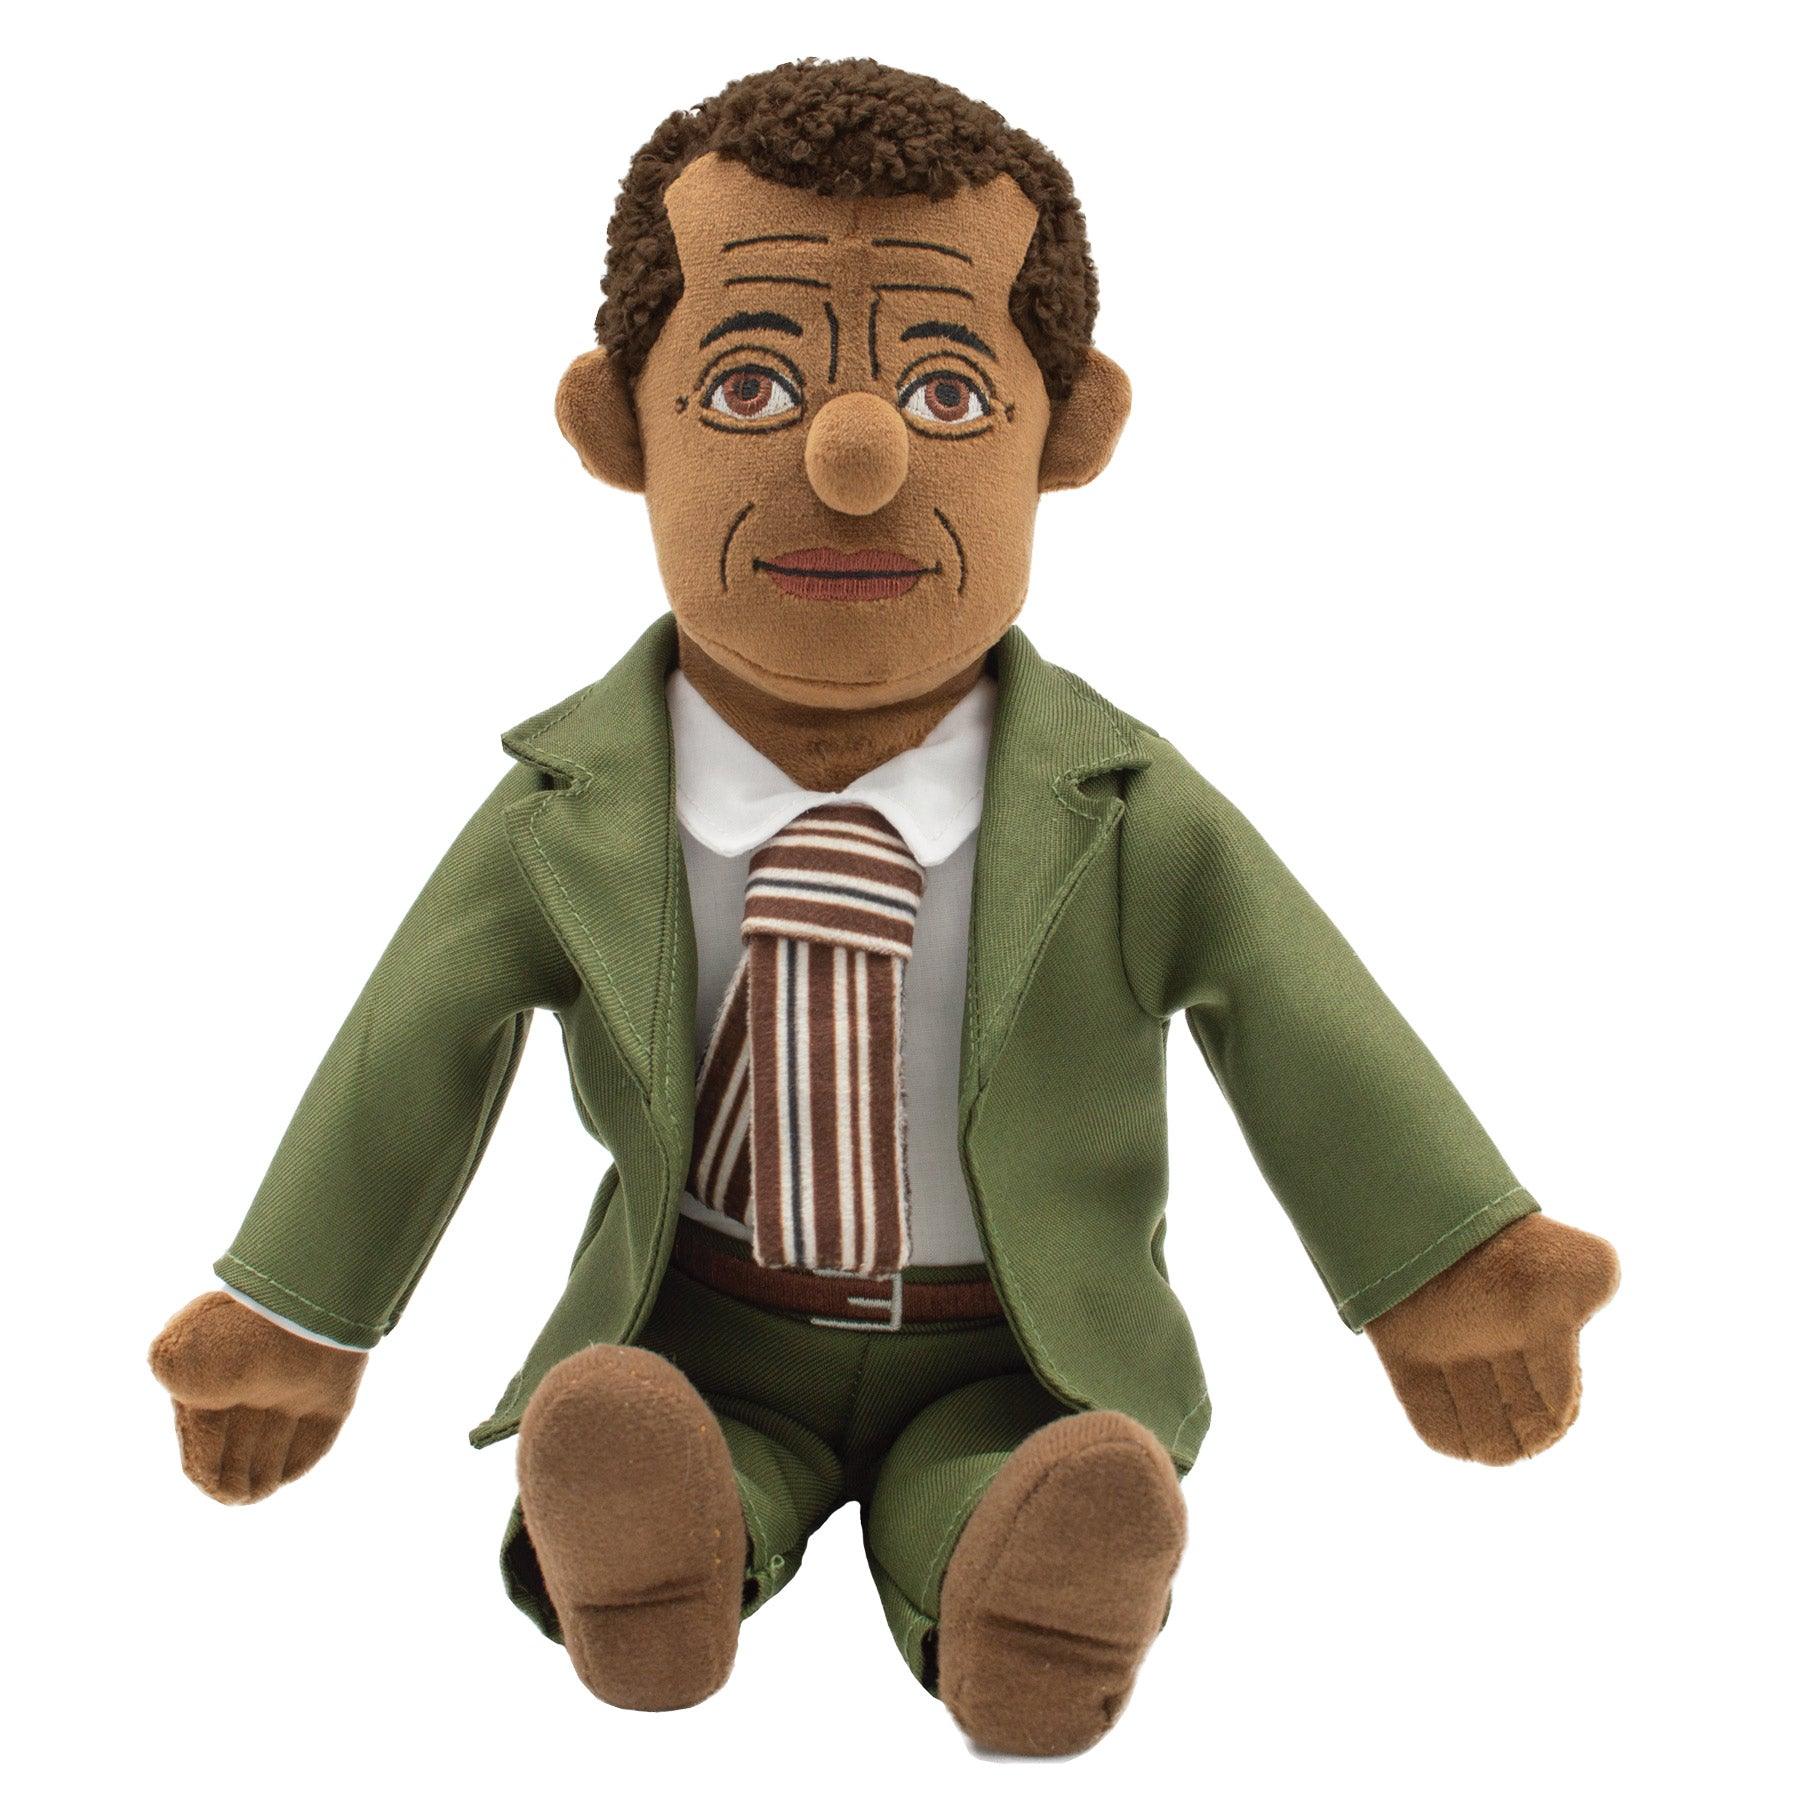 Product photo of James Baldwin Plush Doll, a novelty gift manufactured by The Unemployed Philosophers Guild.